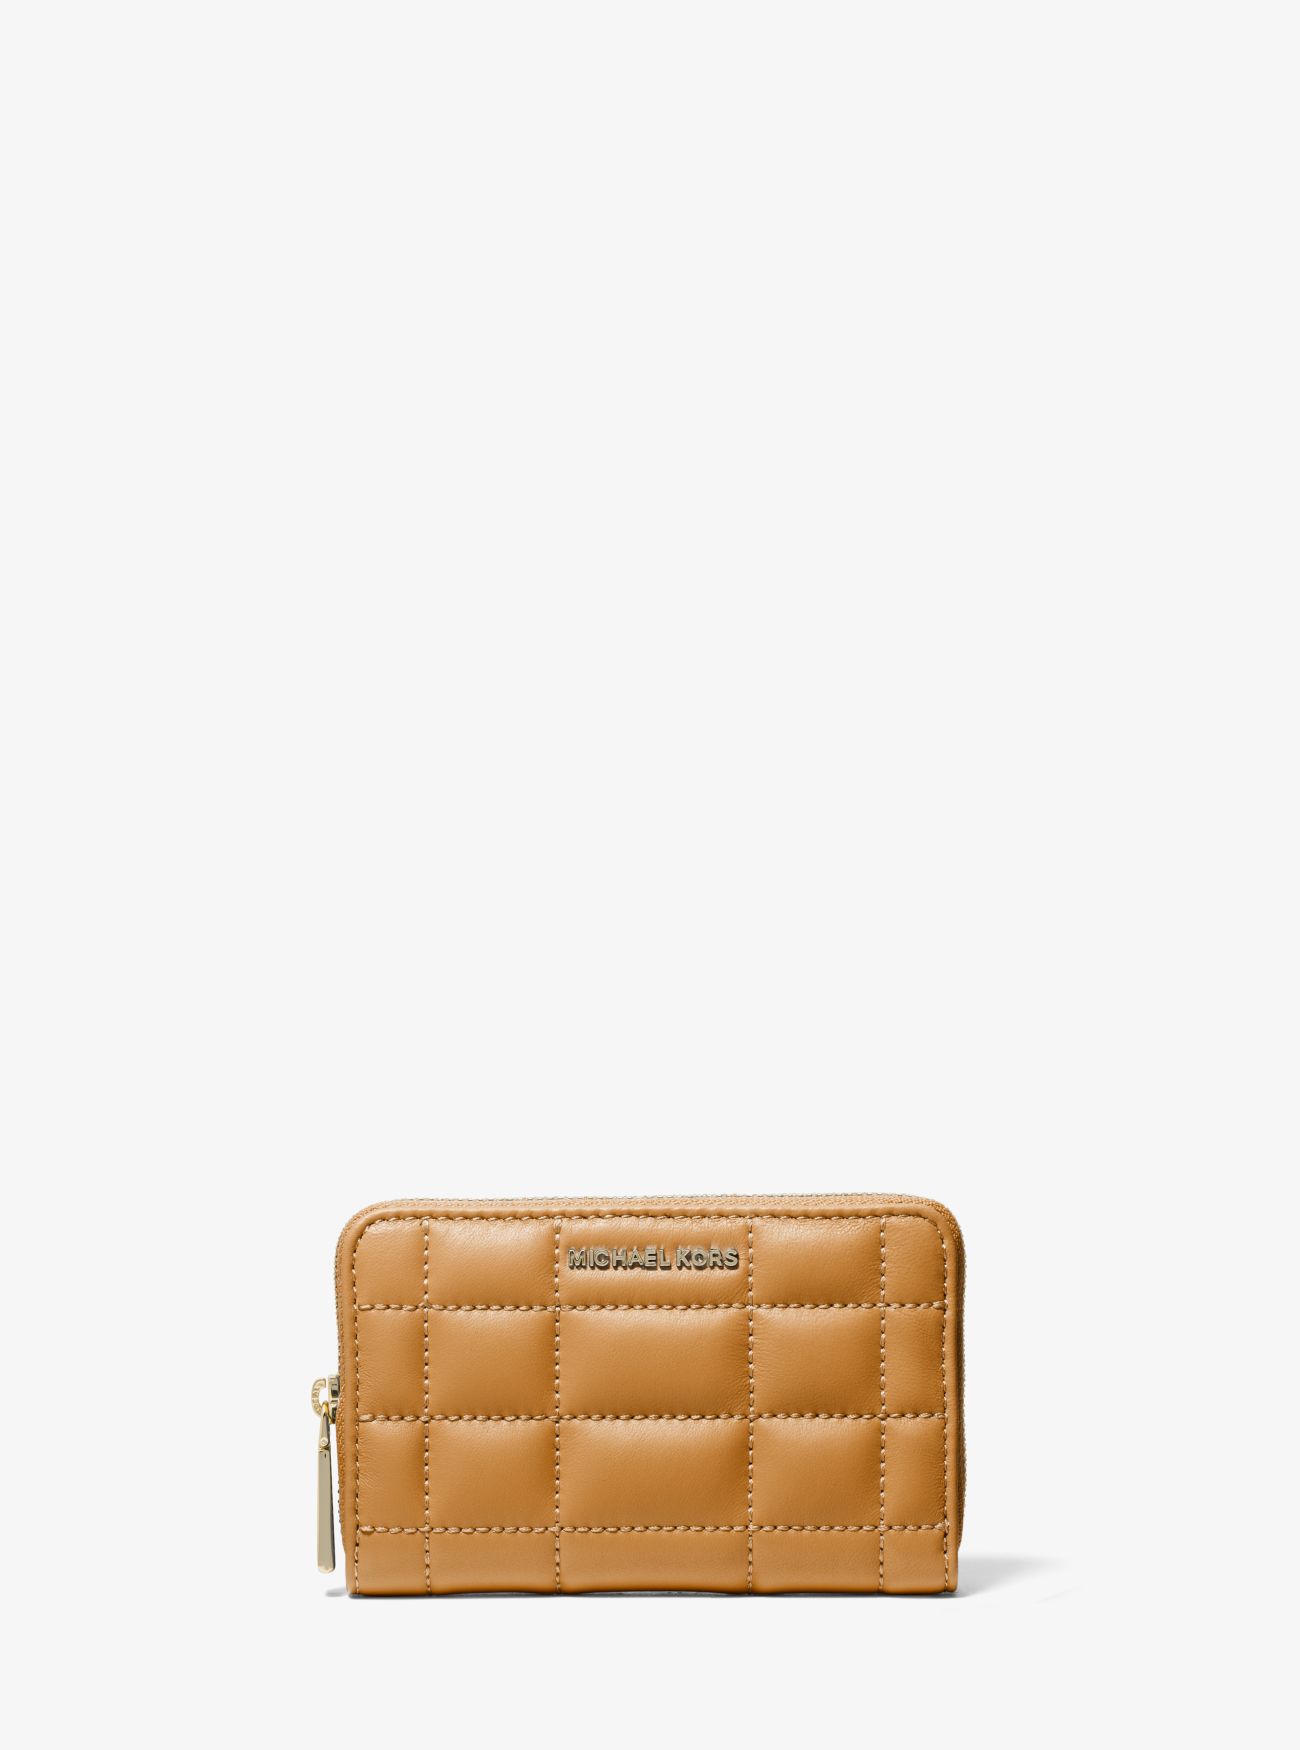 MK Small Quilted Leather Wallet - Brown - Michael Kors